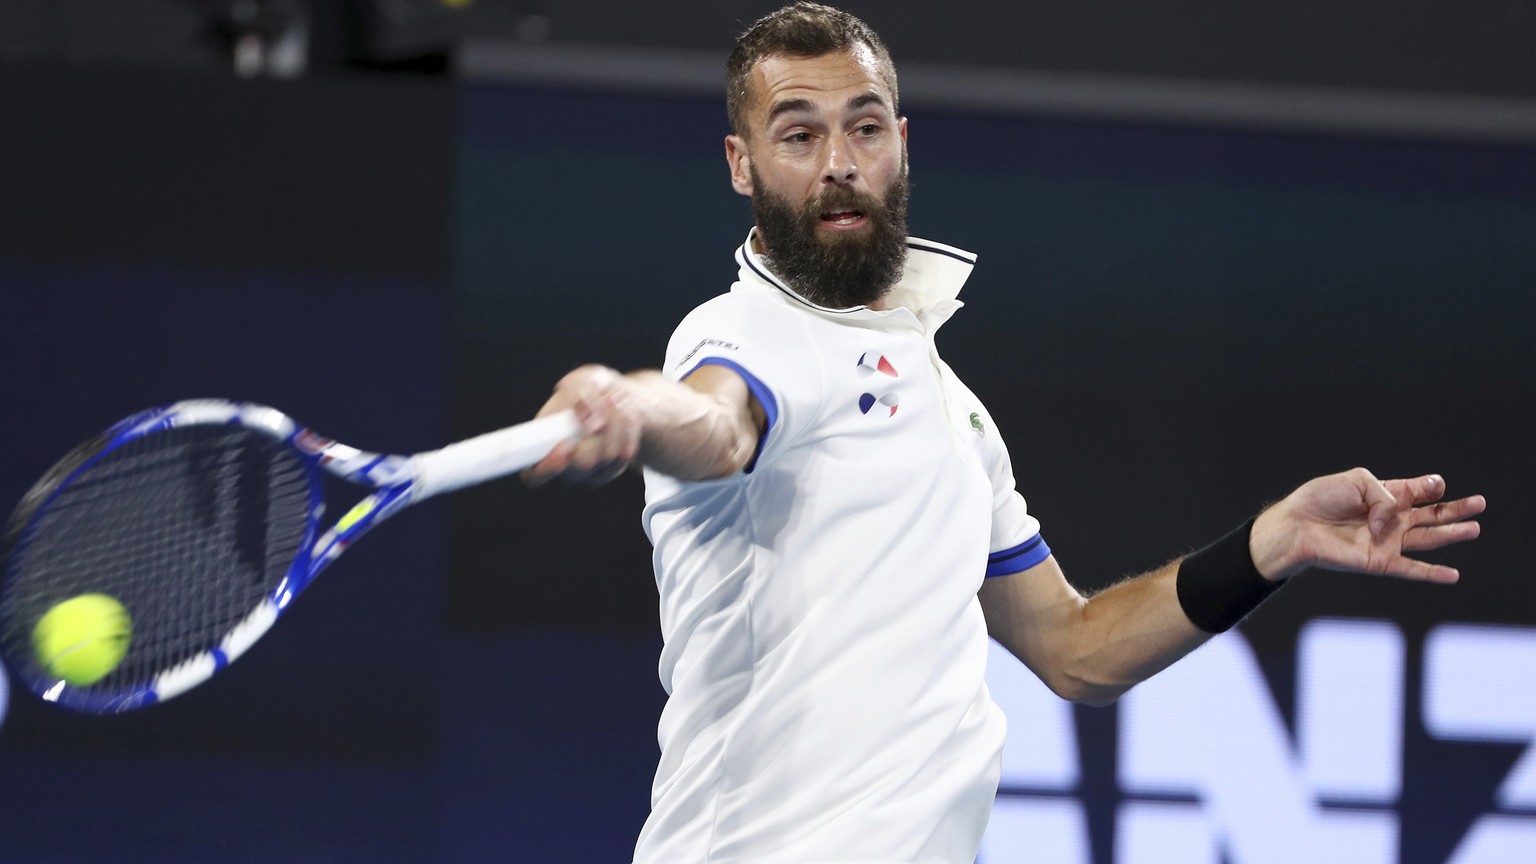 Benoit Paire of France plays a shot during his match against Kevin Anderson of South Africa at the ATP Cup tennis tournament in Brisbane, Australia, Wednesday, Jan. 8, 2020. (AP Photo/Tertius Pickard) ...